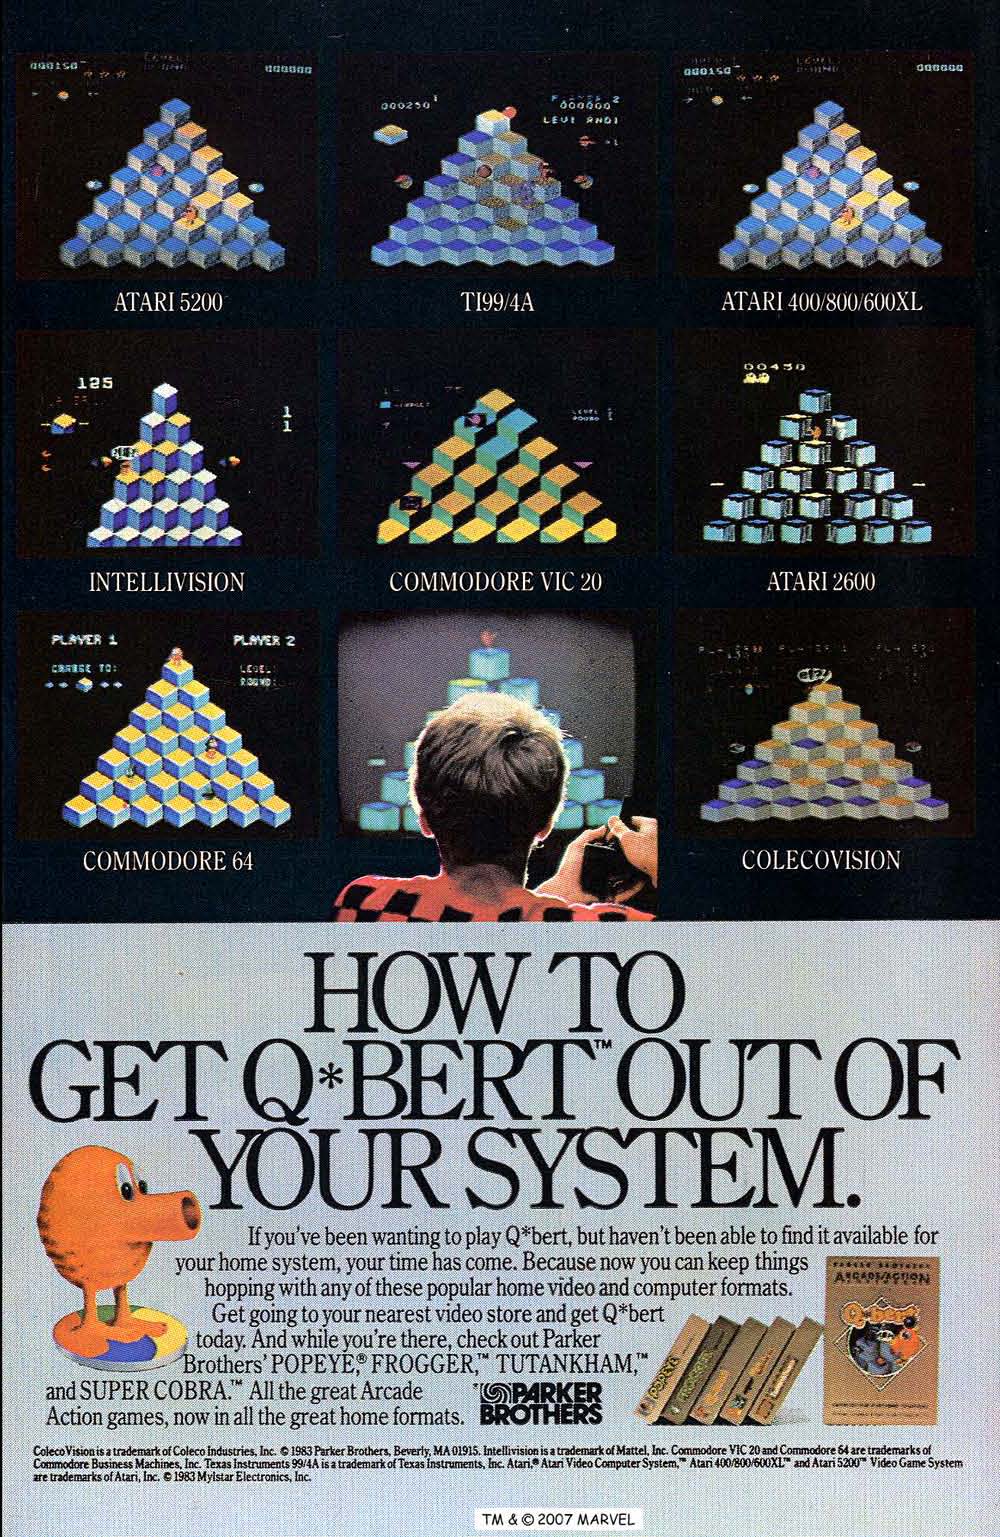 A little insight into what might have caused the 1983 crash in North America. Q*Bert was a smash hit in the arcades, so it was only a matter of time […]